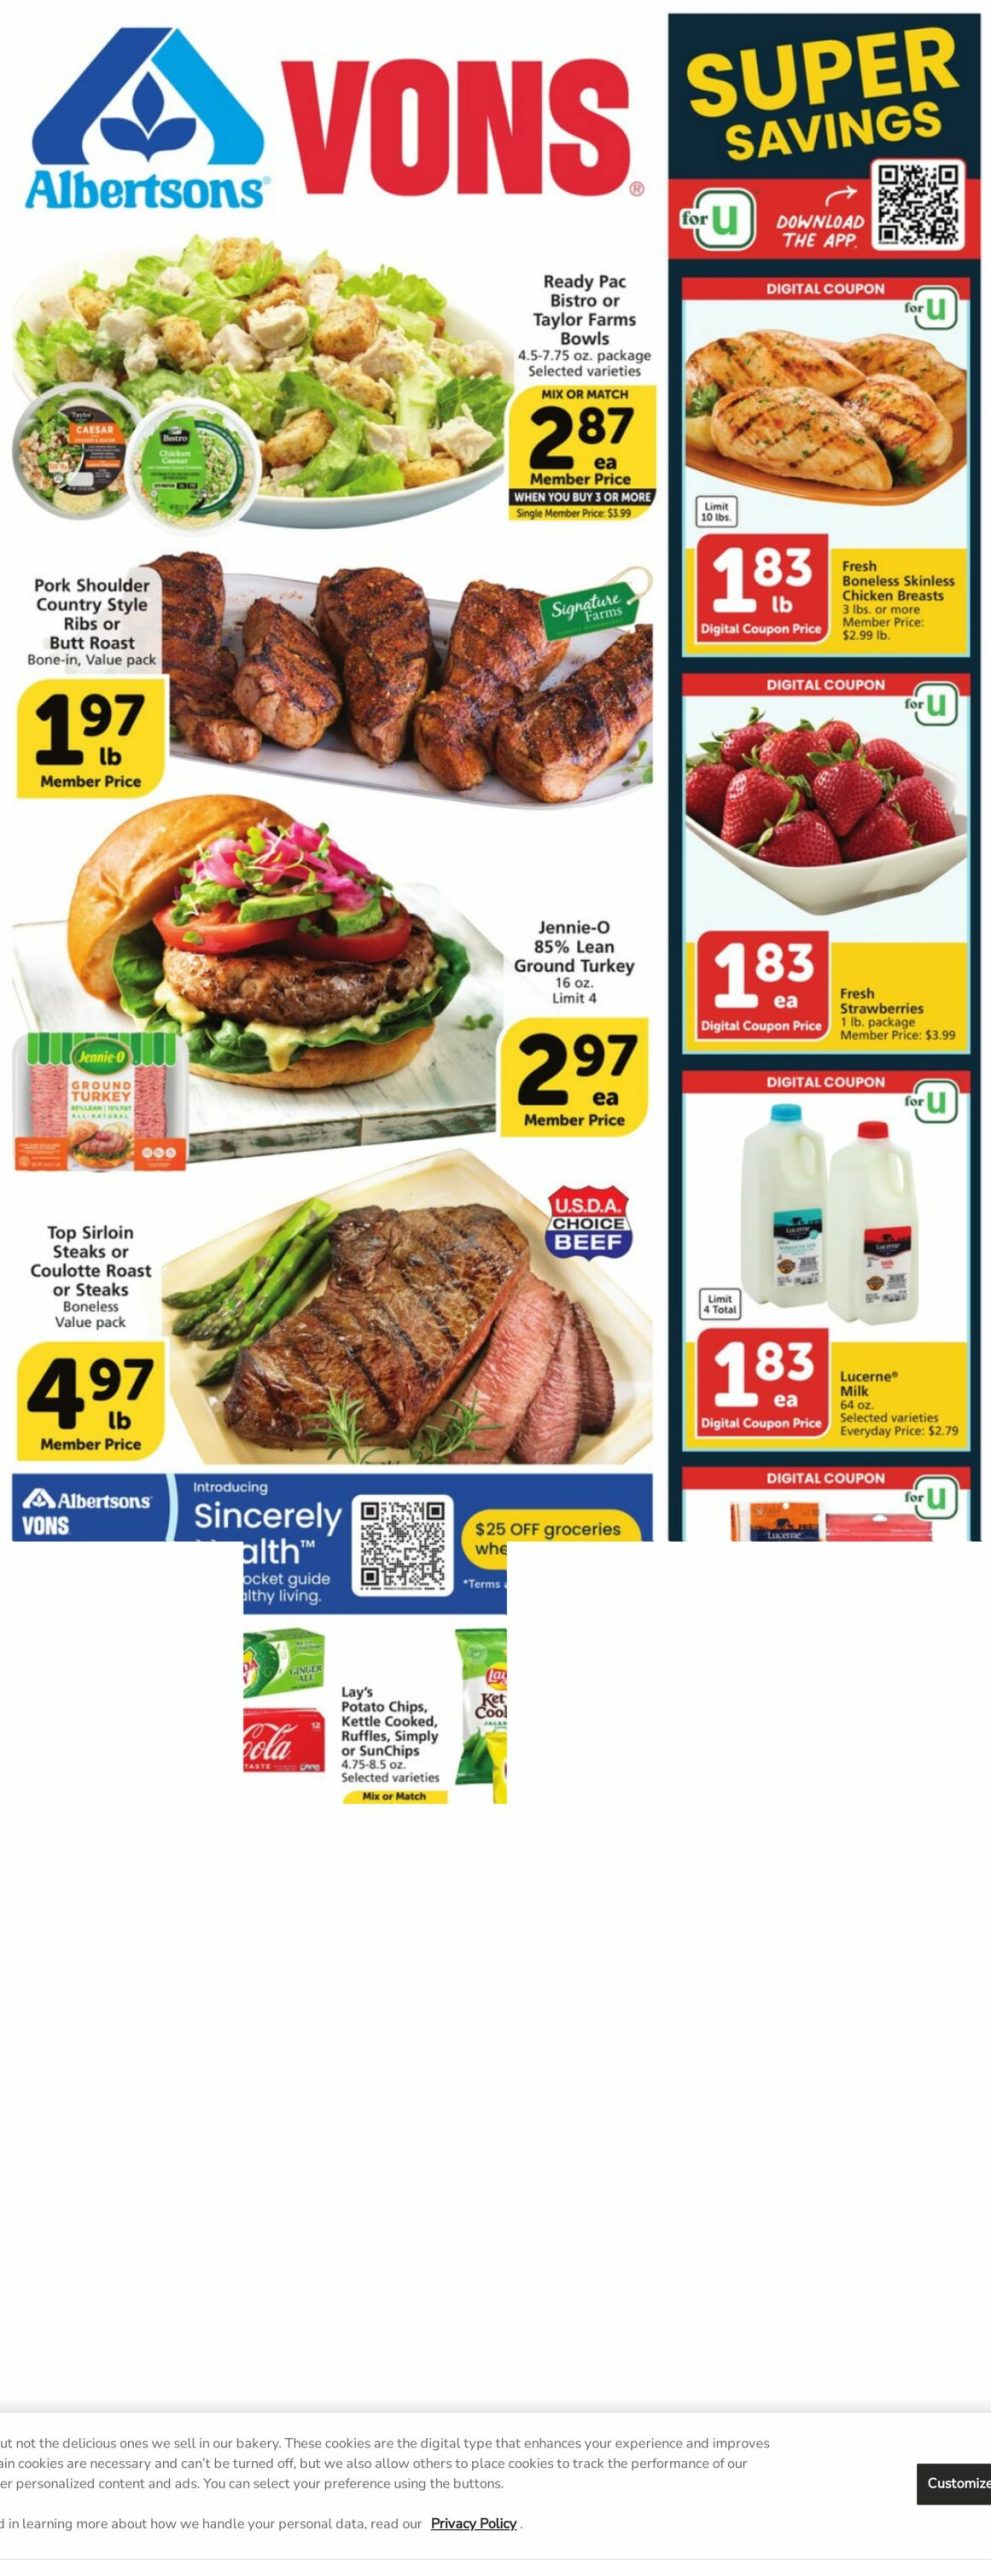 Vons Weekly Ad March 22 - 28, 2023 Preview 1